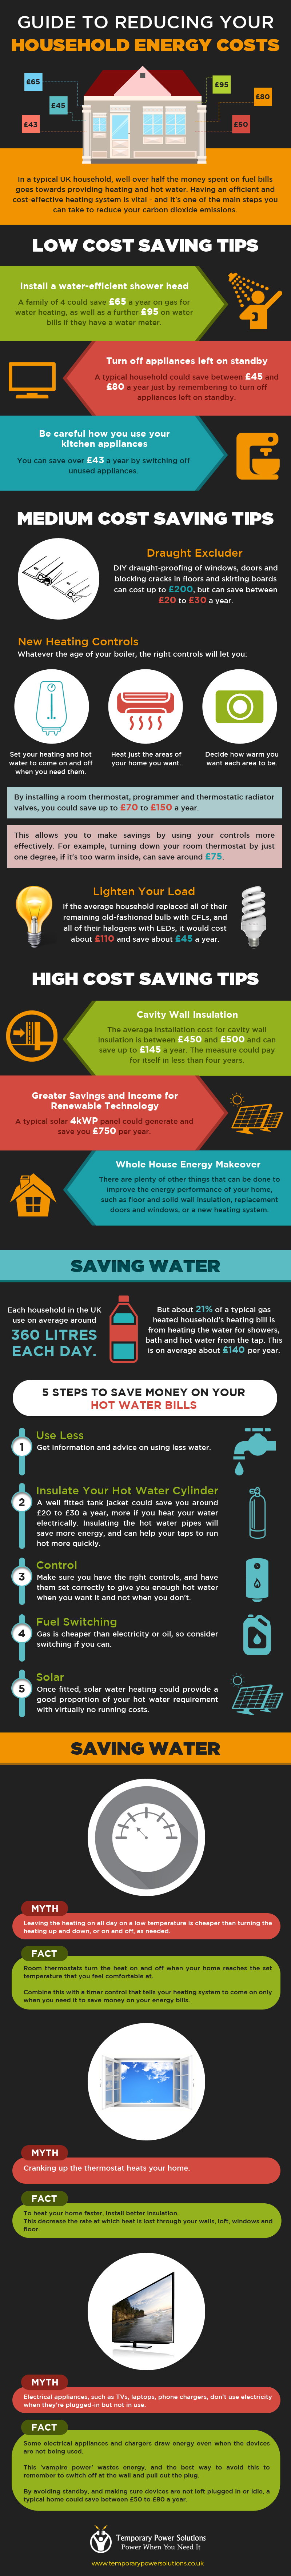 Guide to reducing your household energy costs